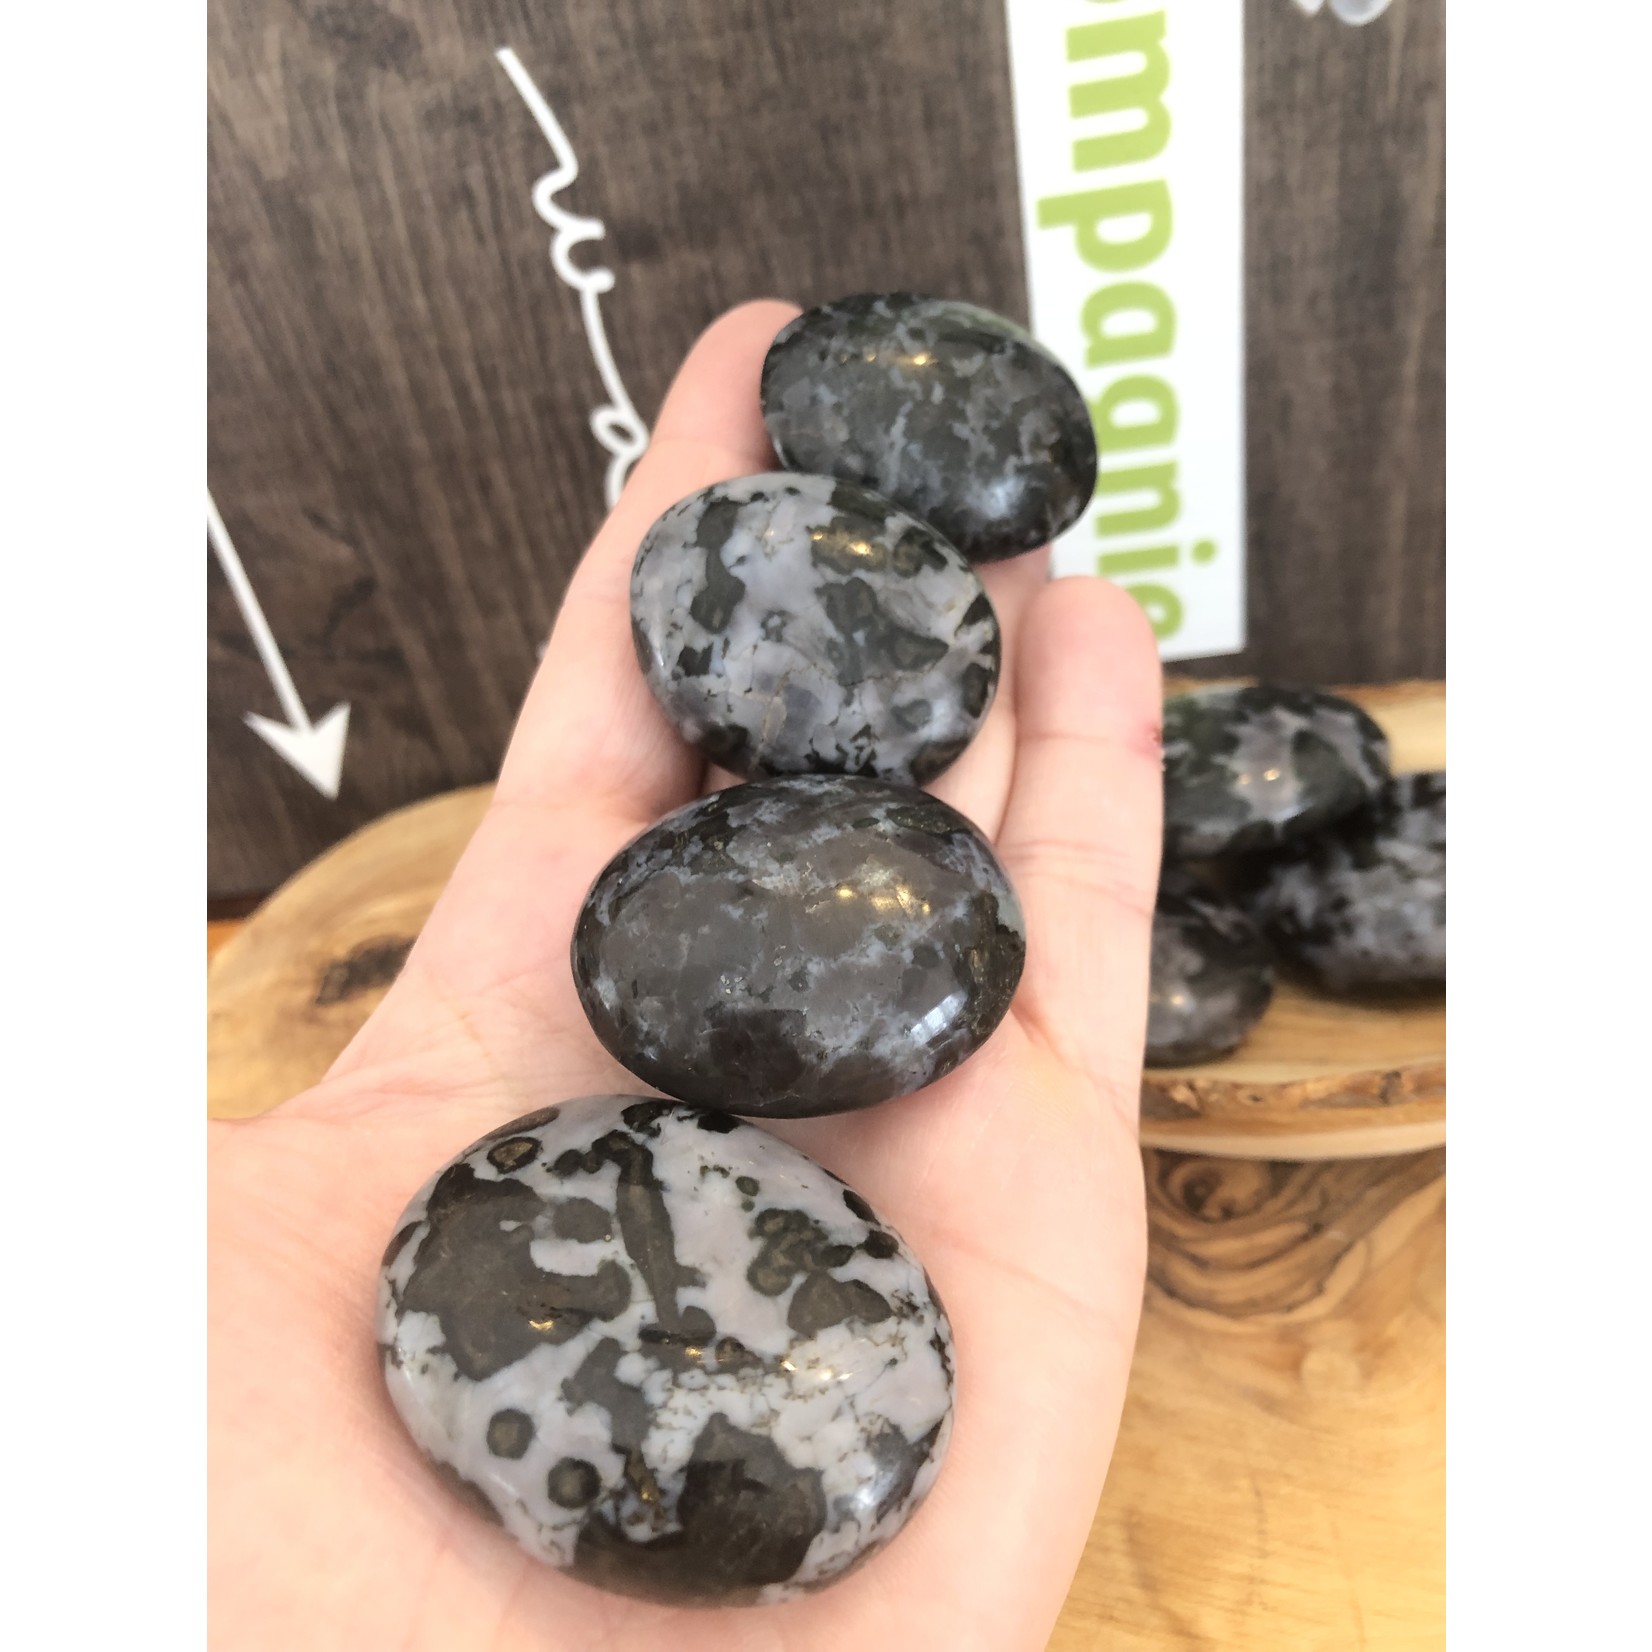 soft merlinite gabbro pebble, also called mystical merlinite, stone in homage to the magician Merlin, it would be a magic stone